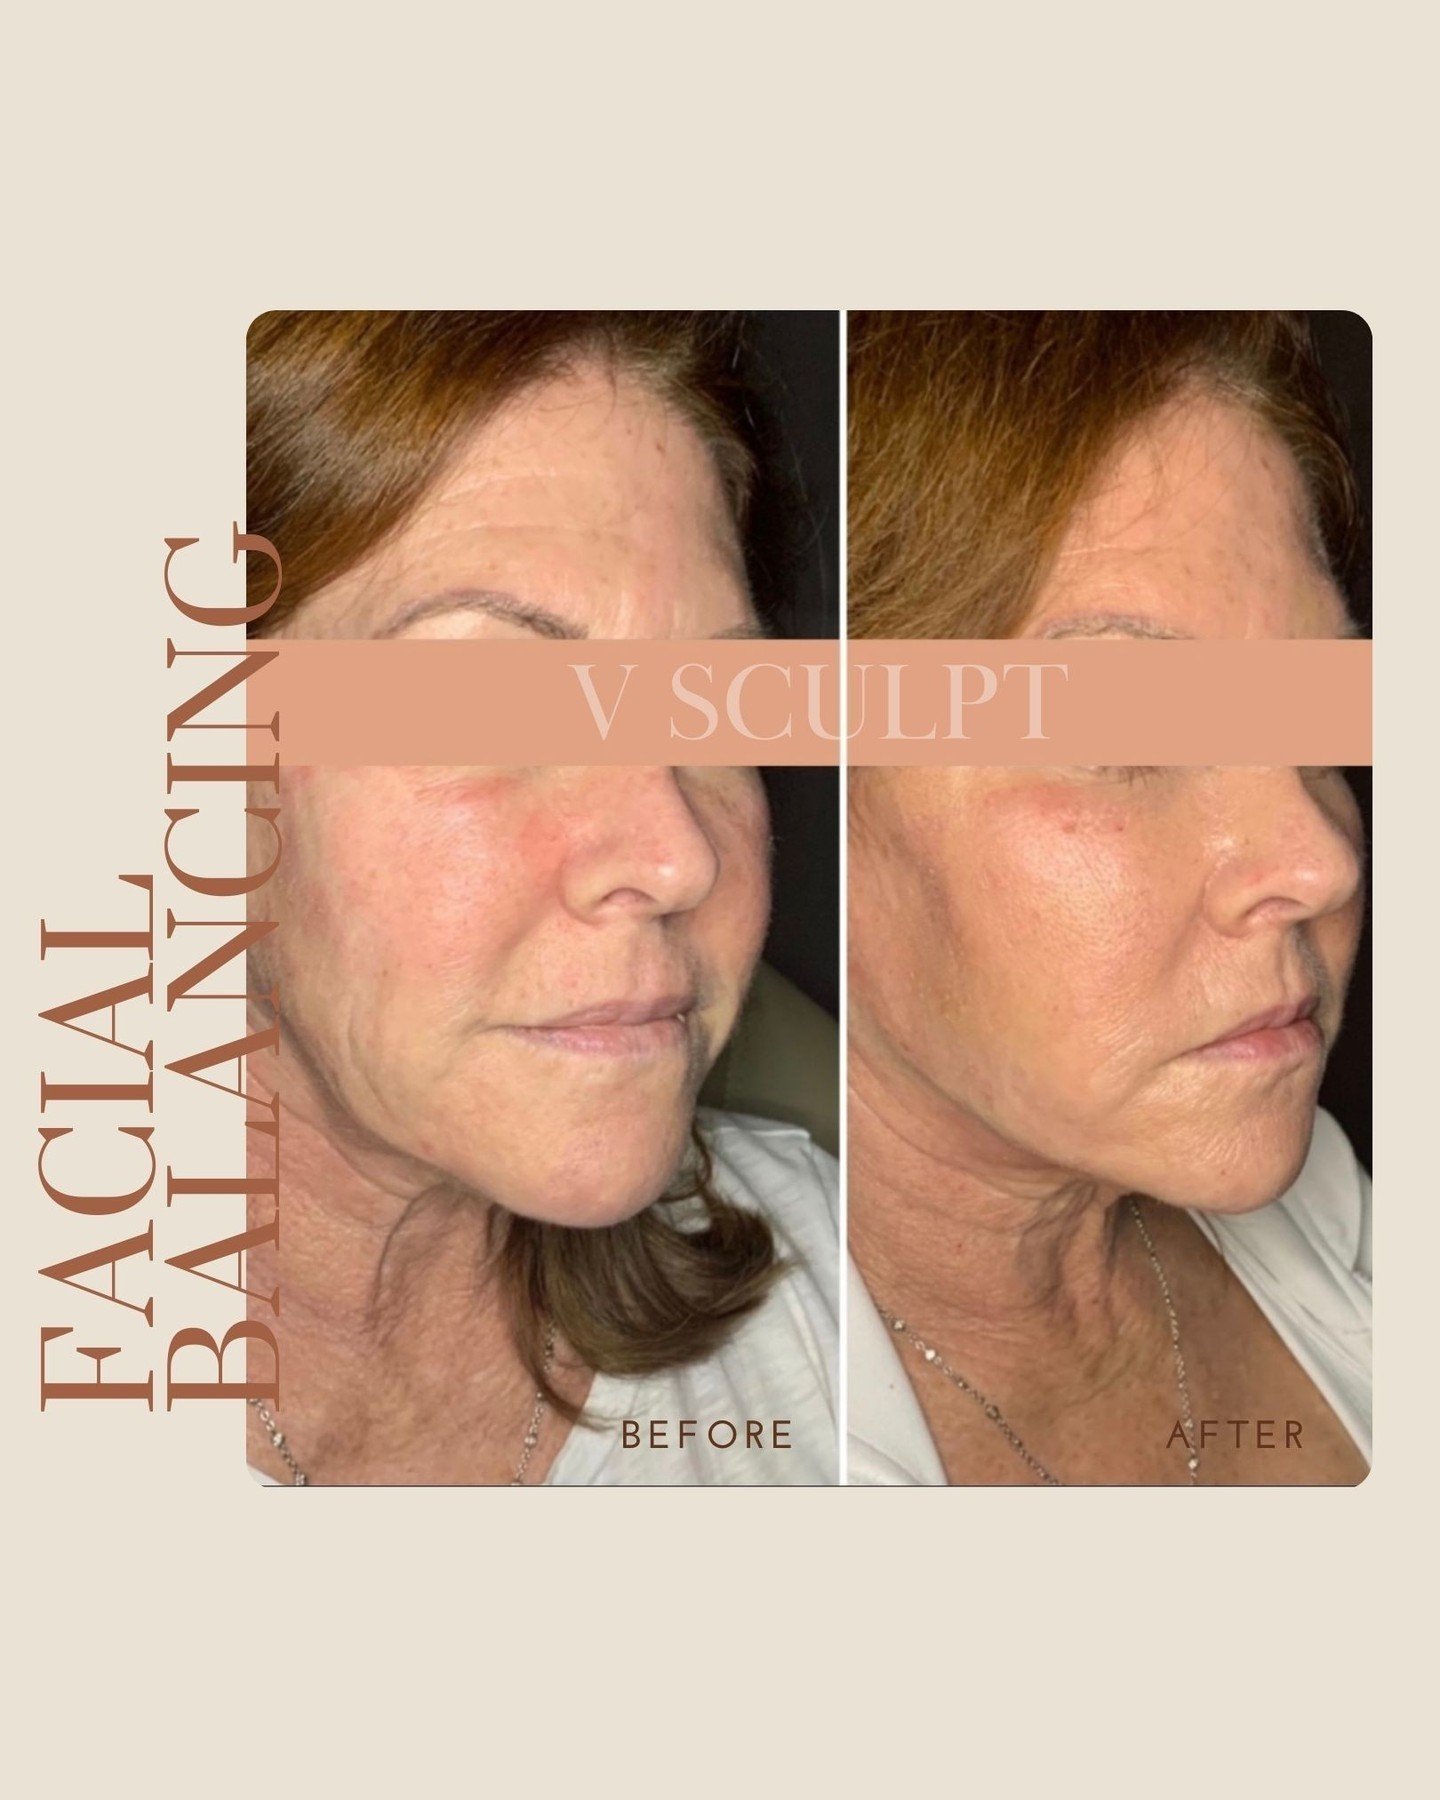 Witness the transformative power of Facial Balancing! From subtle enhancements to harmonious symmetry, our patient's journey speaks volumes. At VSculpt Aesthetics, we believe in celebrating your unique features while achieving balance and radiance. R